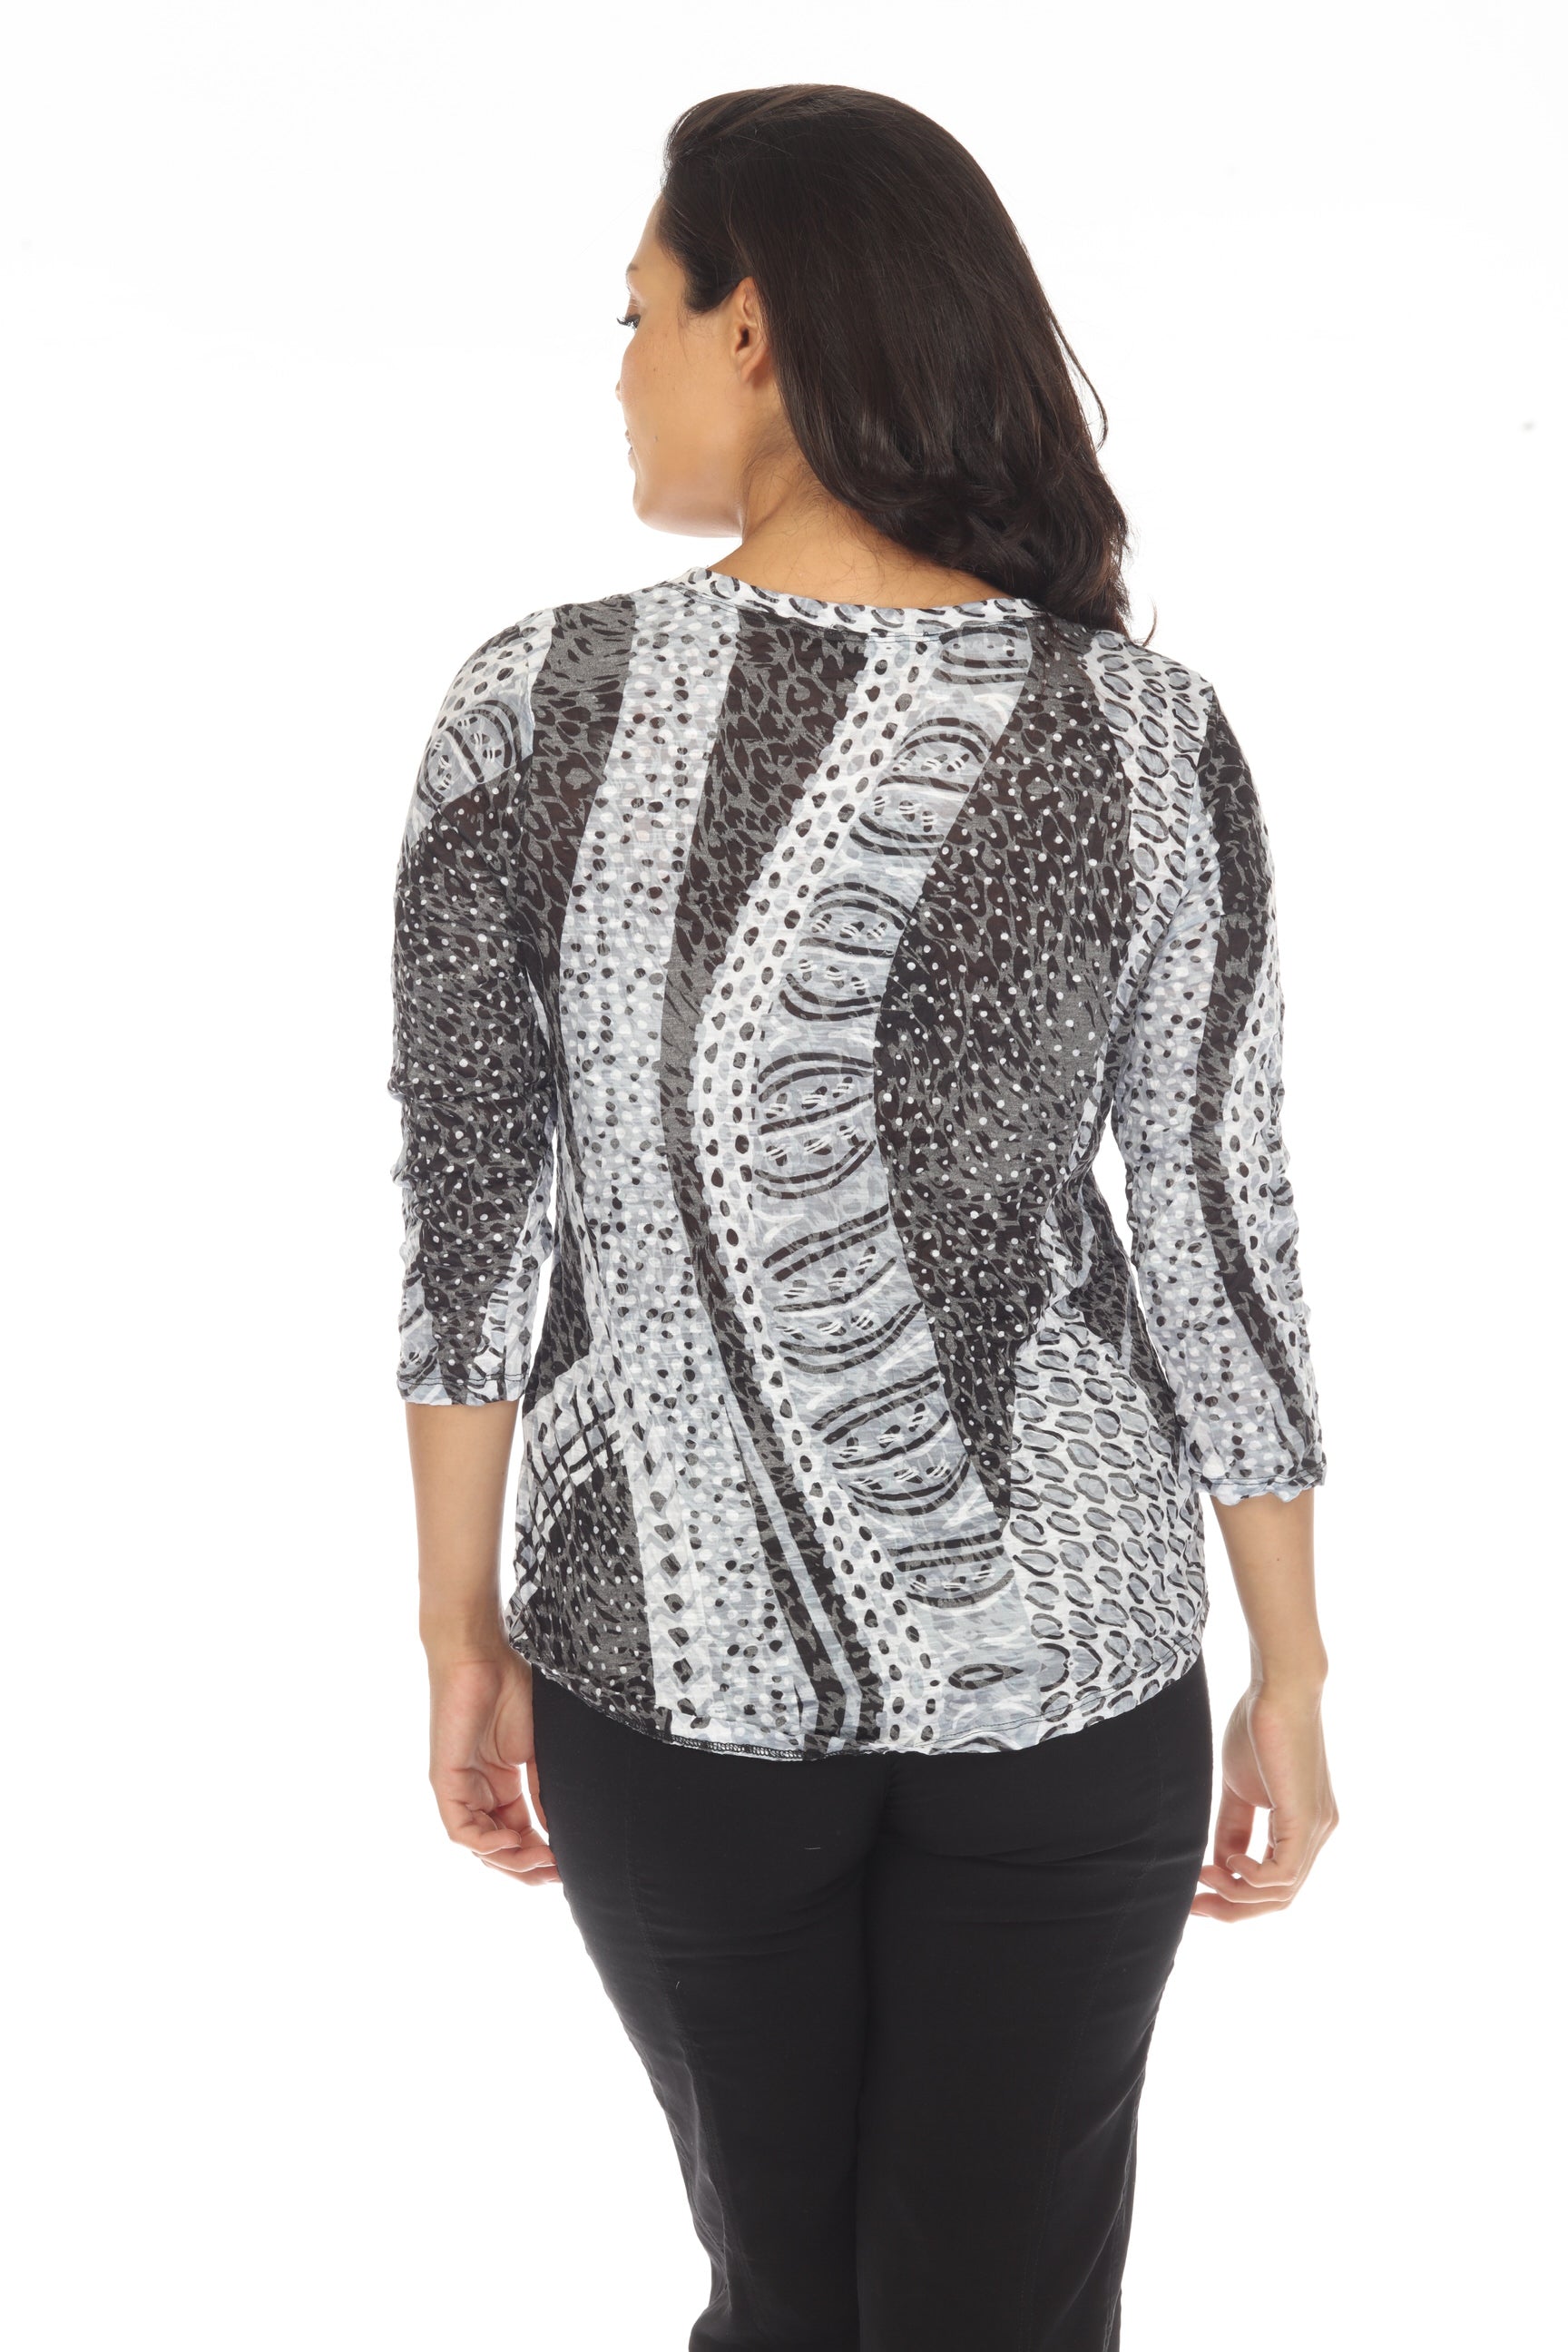 V-Neck Top - African Abstract - CARINE